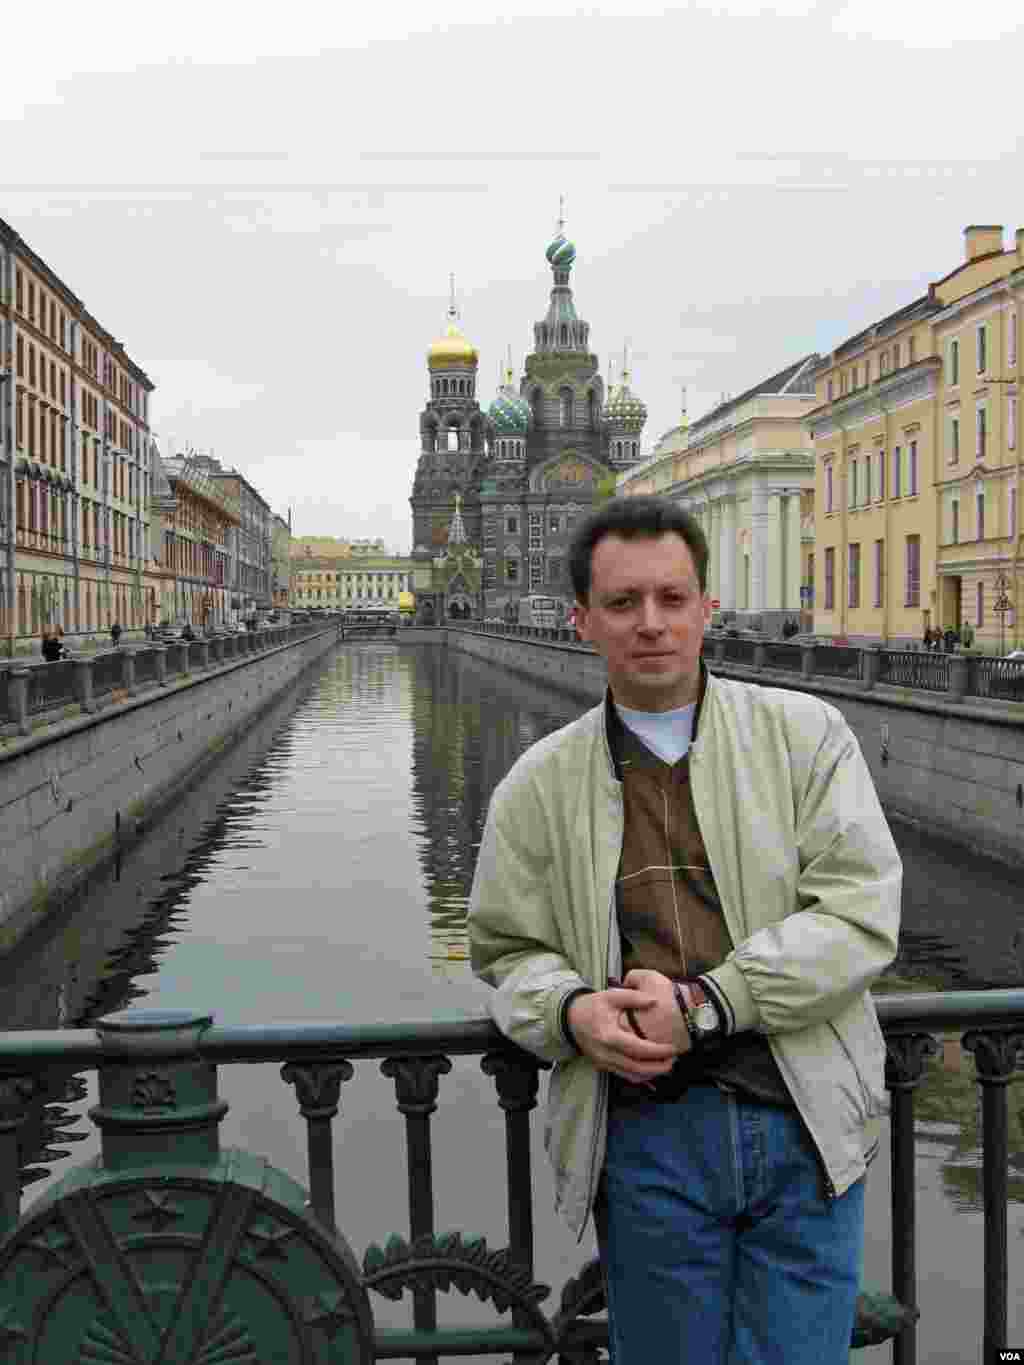 Mikhail, seen here in Saint Petersburg, lives in Nizny Novgorod, Russia. He has listened to Special English programs since 1992 &ndash; first on shortwave, now on the Internet.